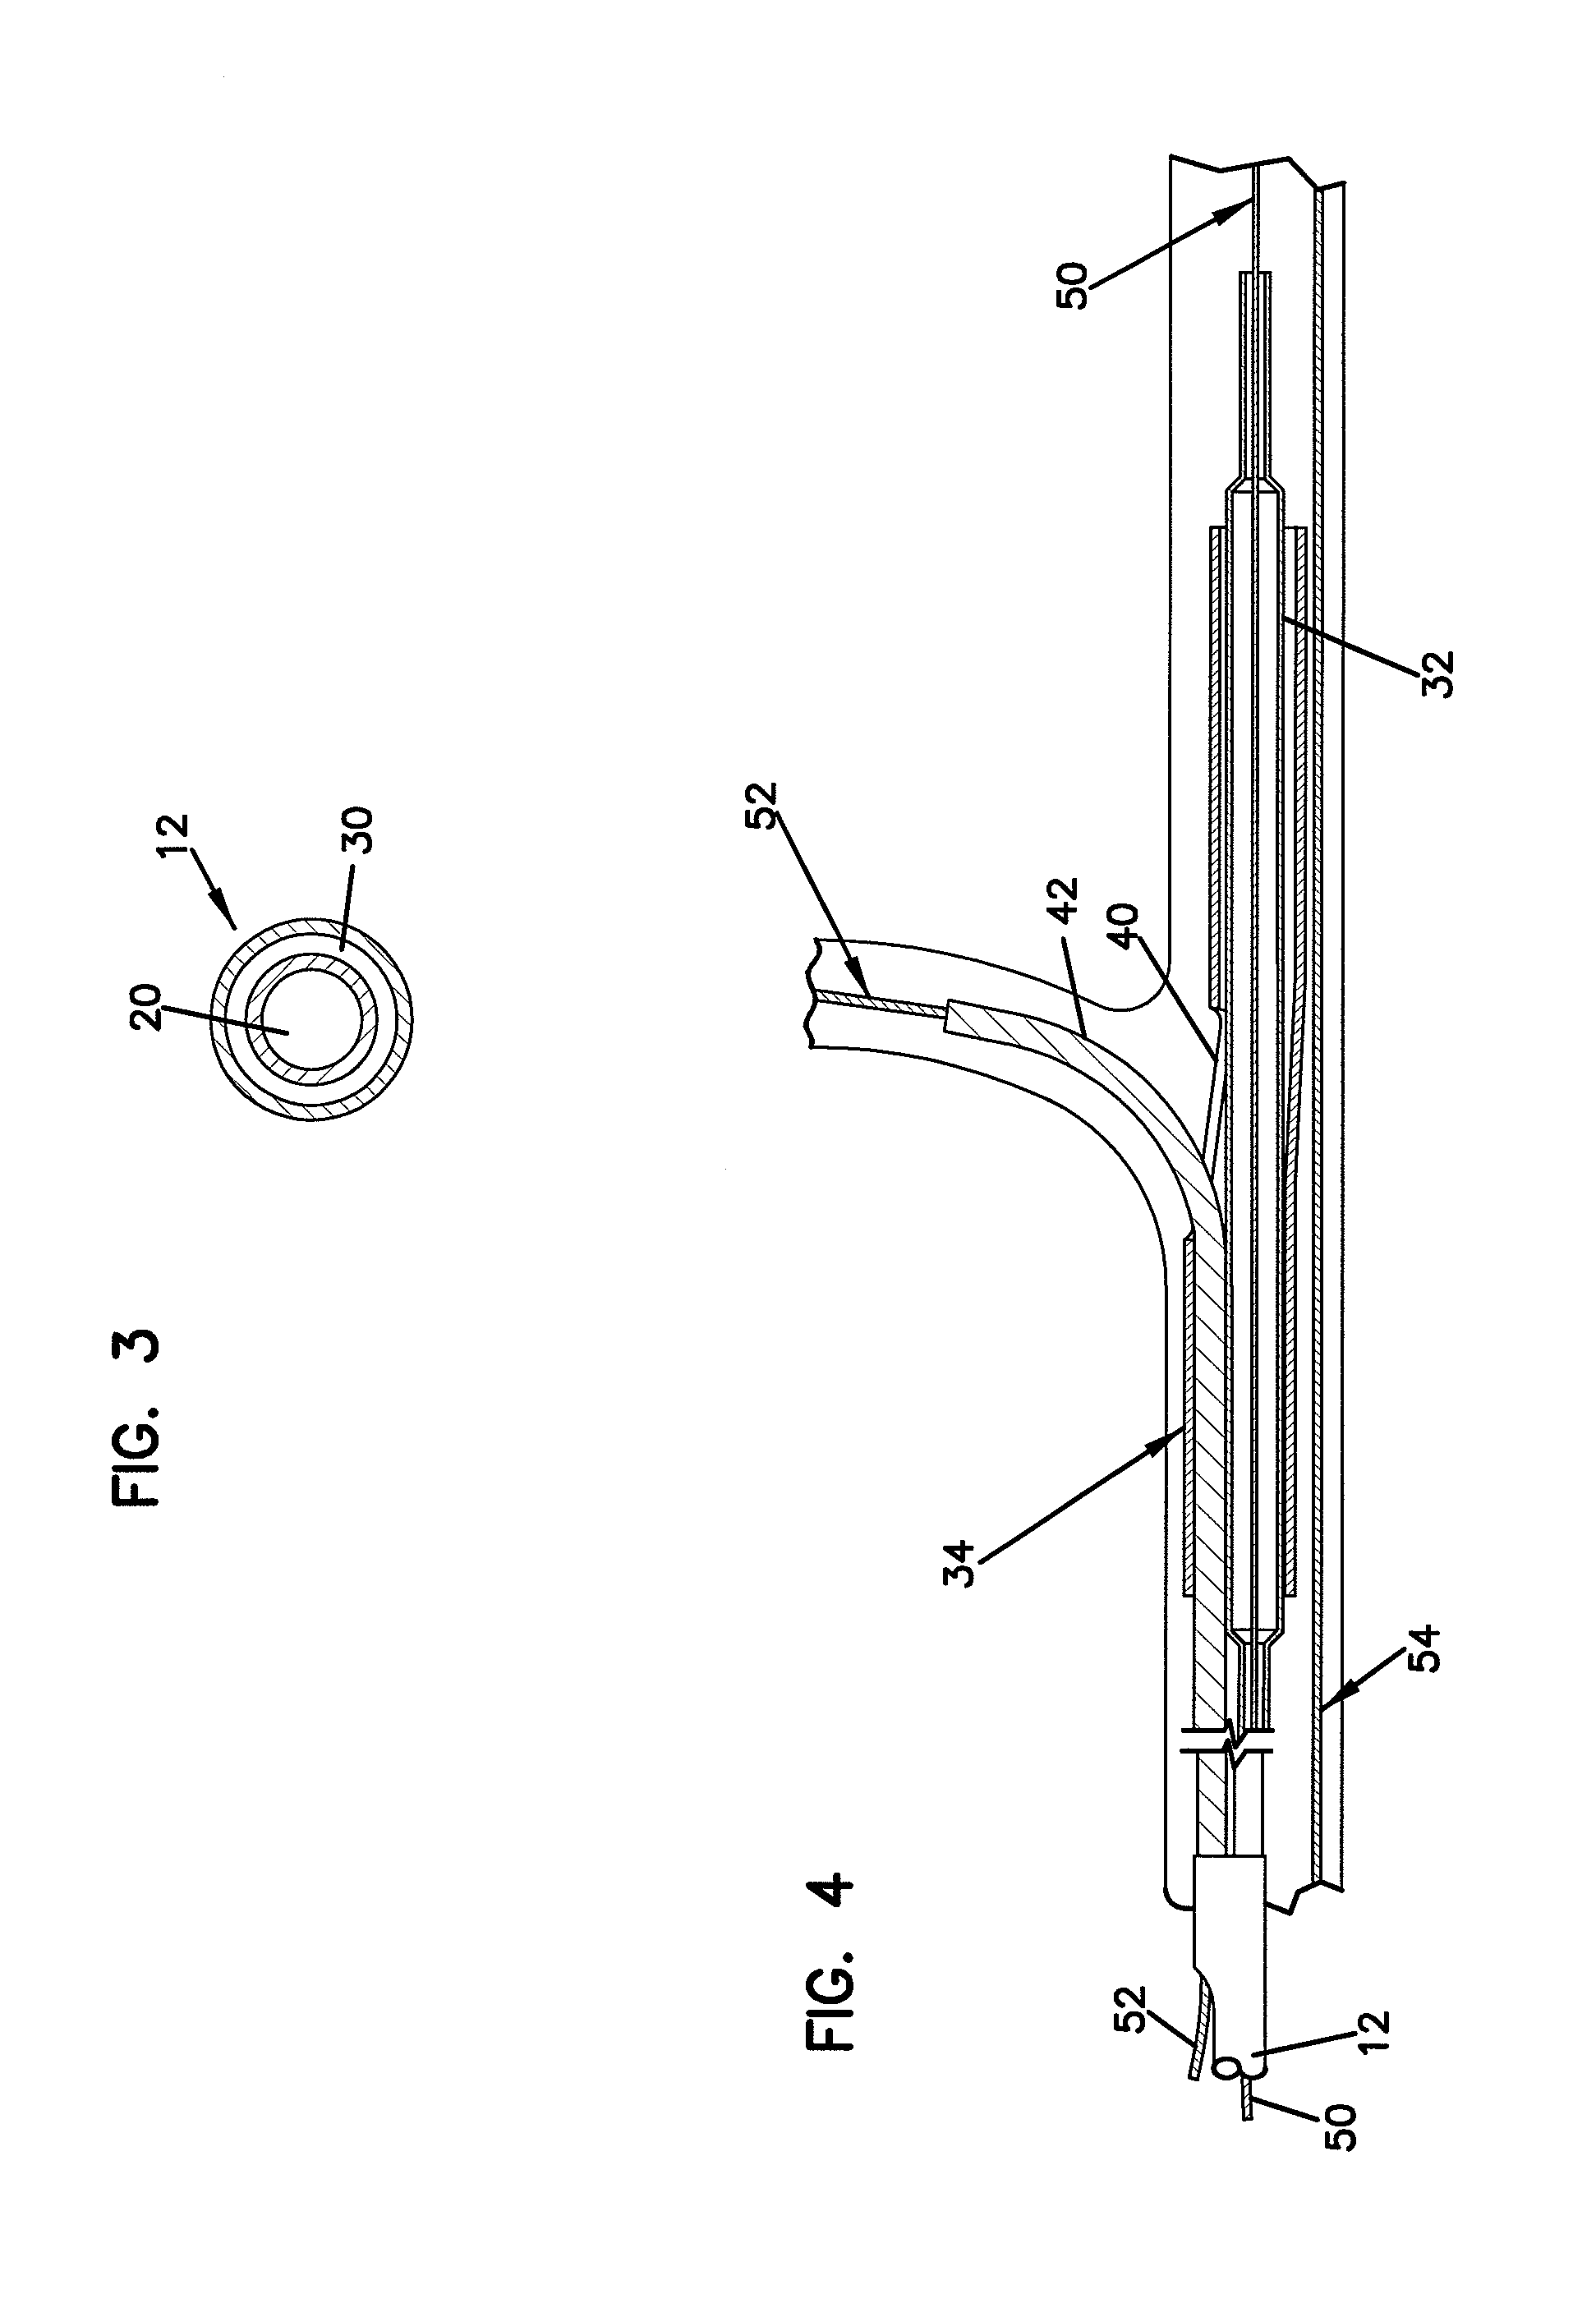 Short sleeve stent delivery catheter and methods